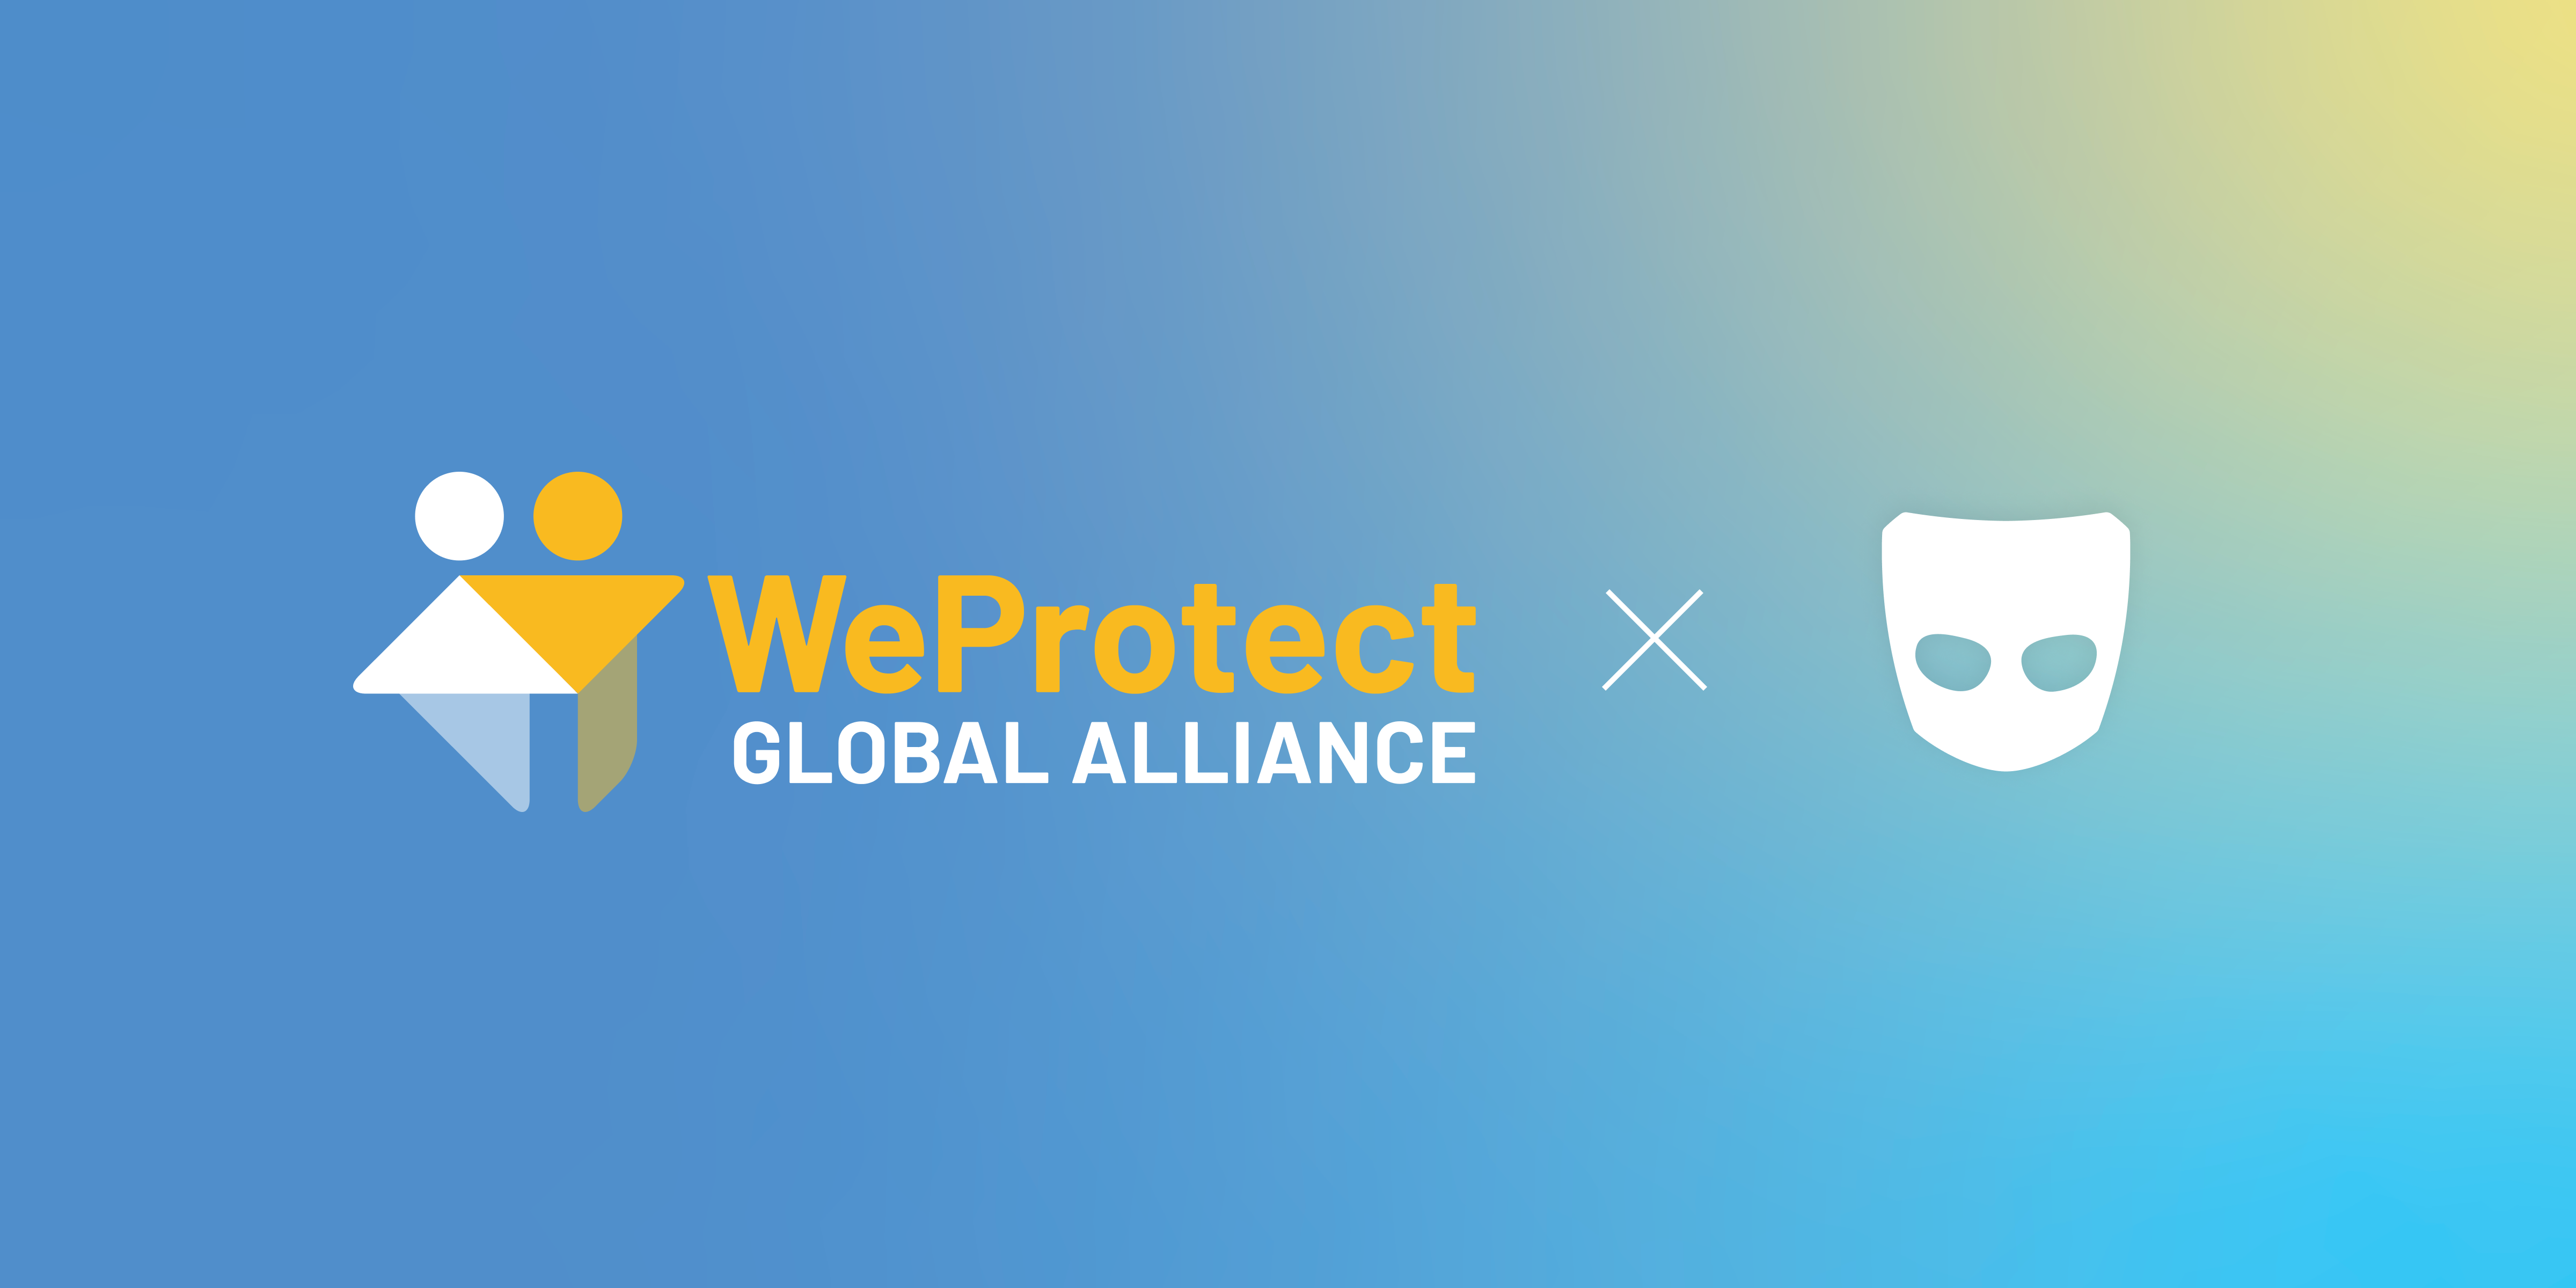 Grindr joins the WeProtect Global Alliance